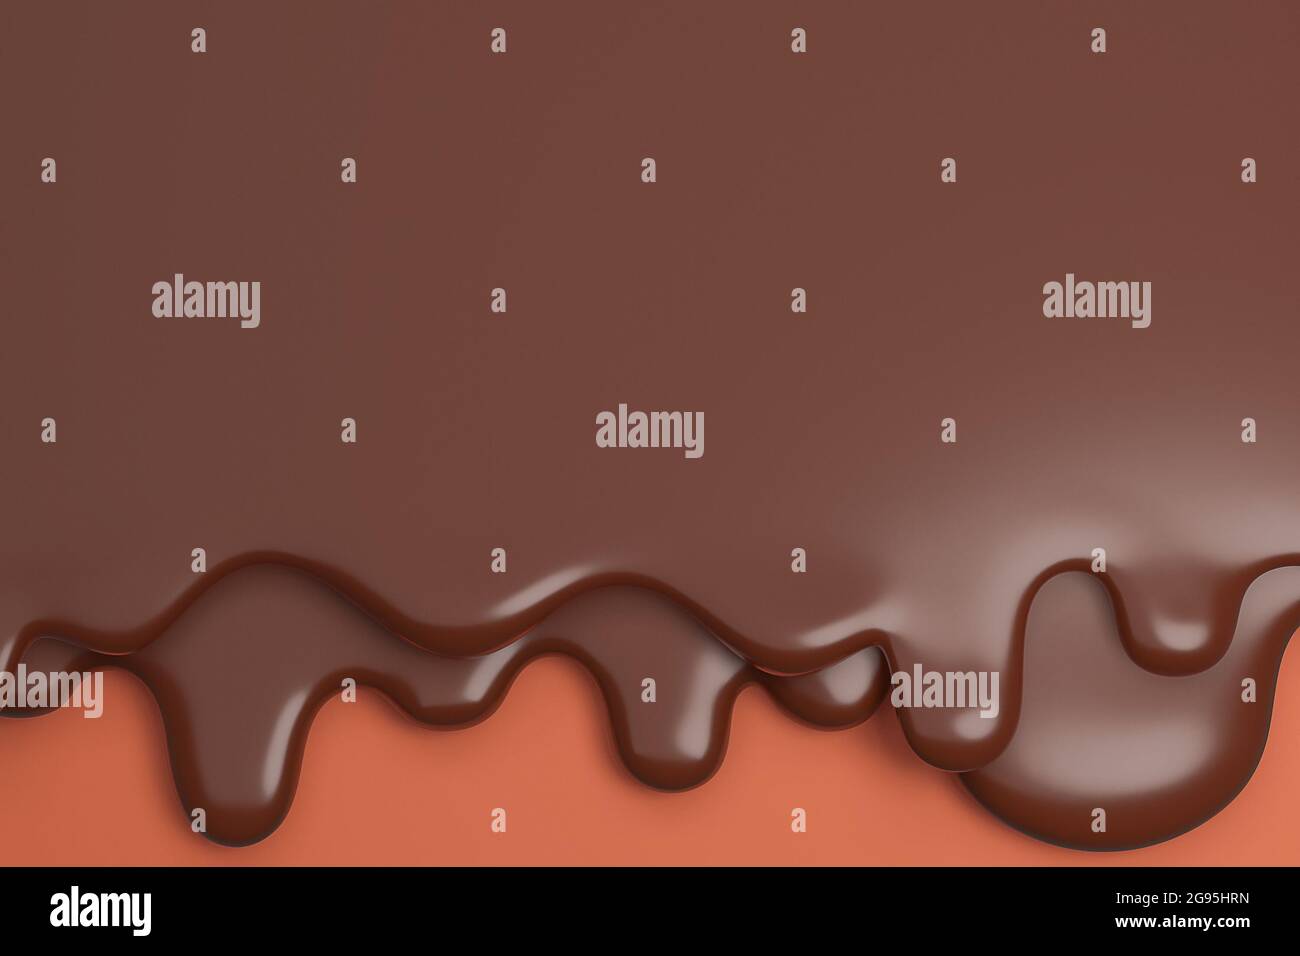 Melted milk brown chocolate flow down.,3d model and illustration. Stock Photo